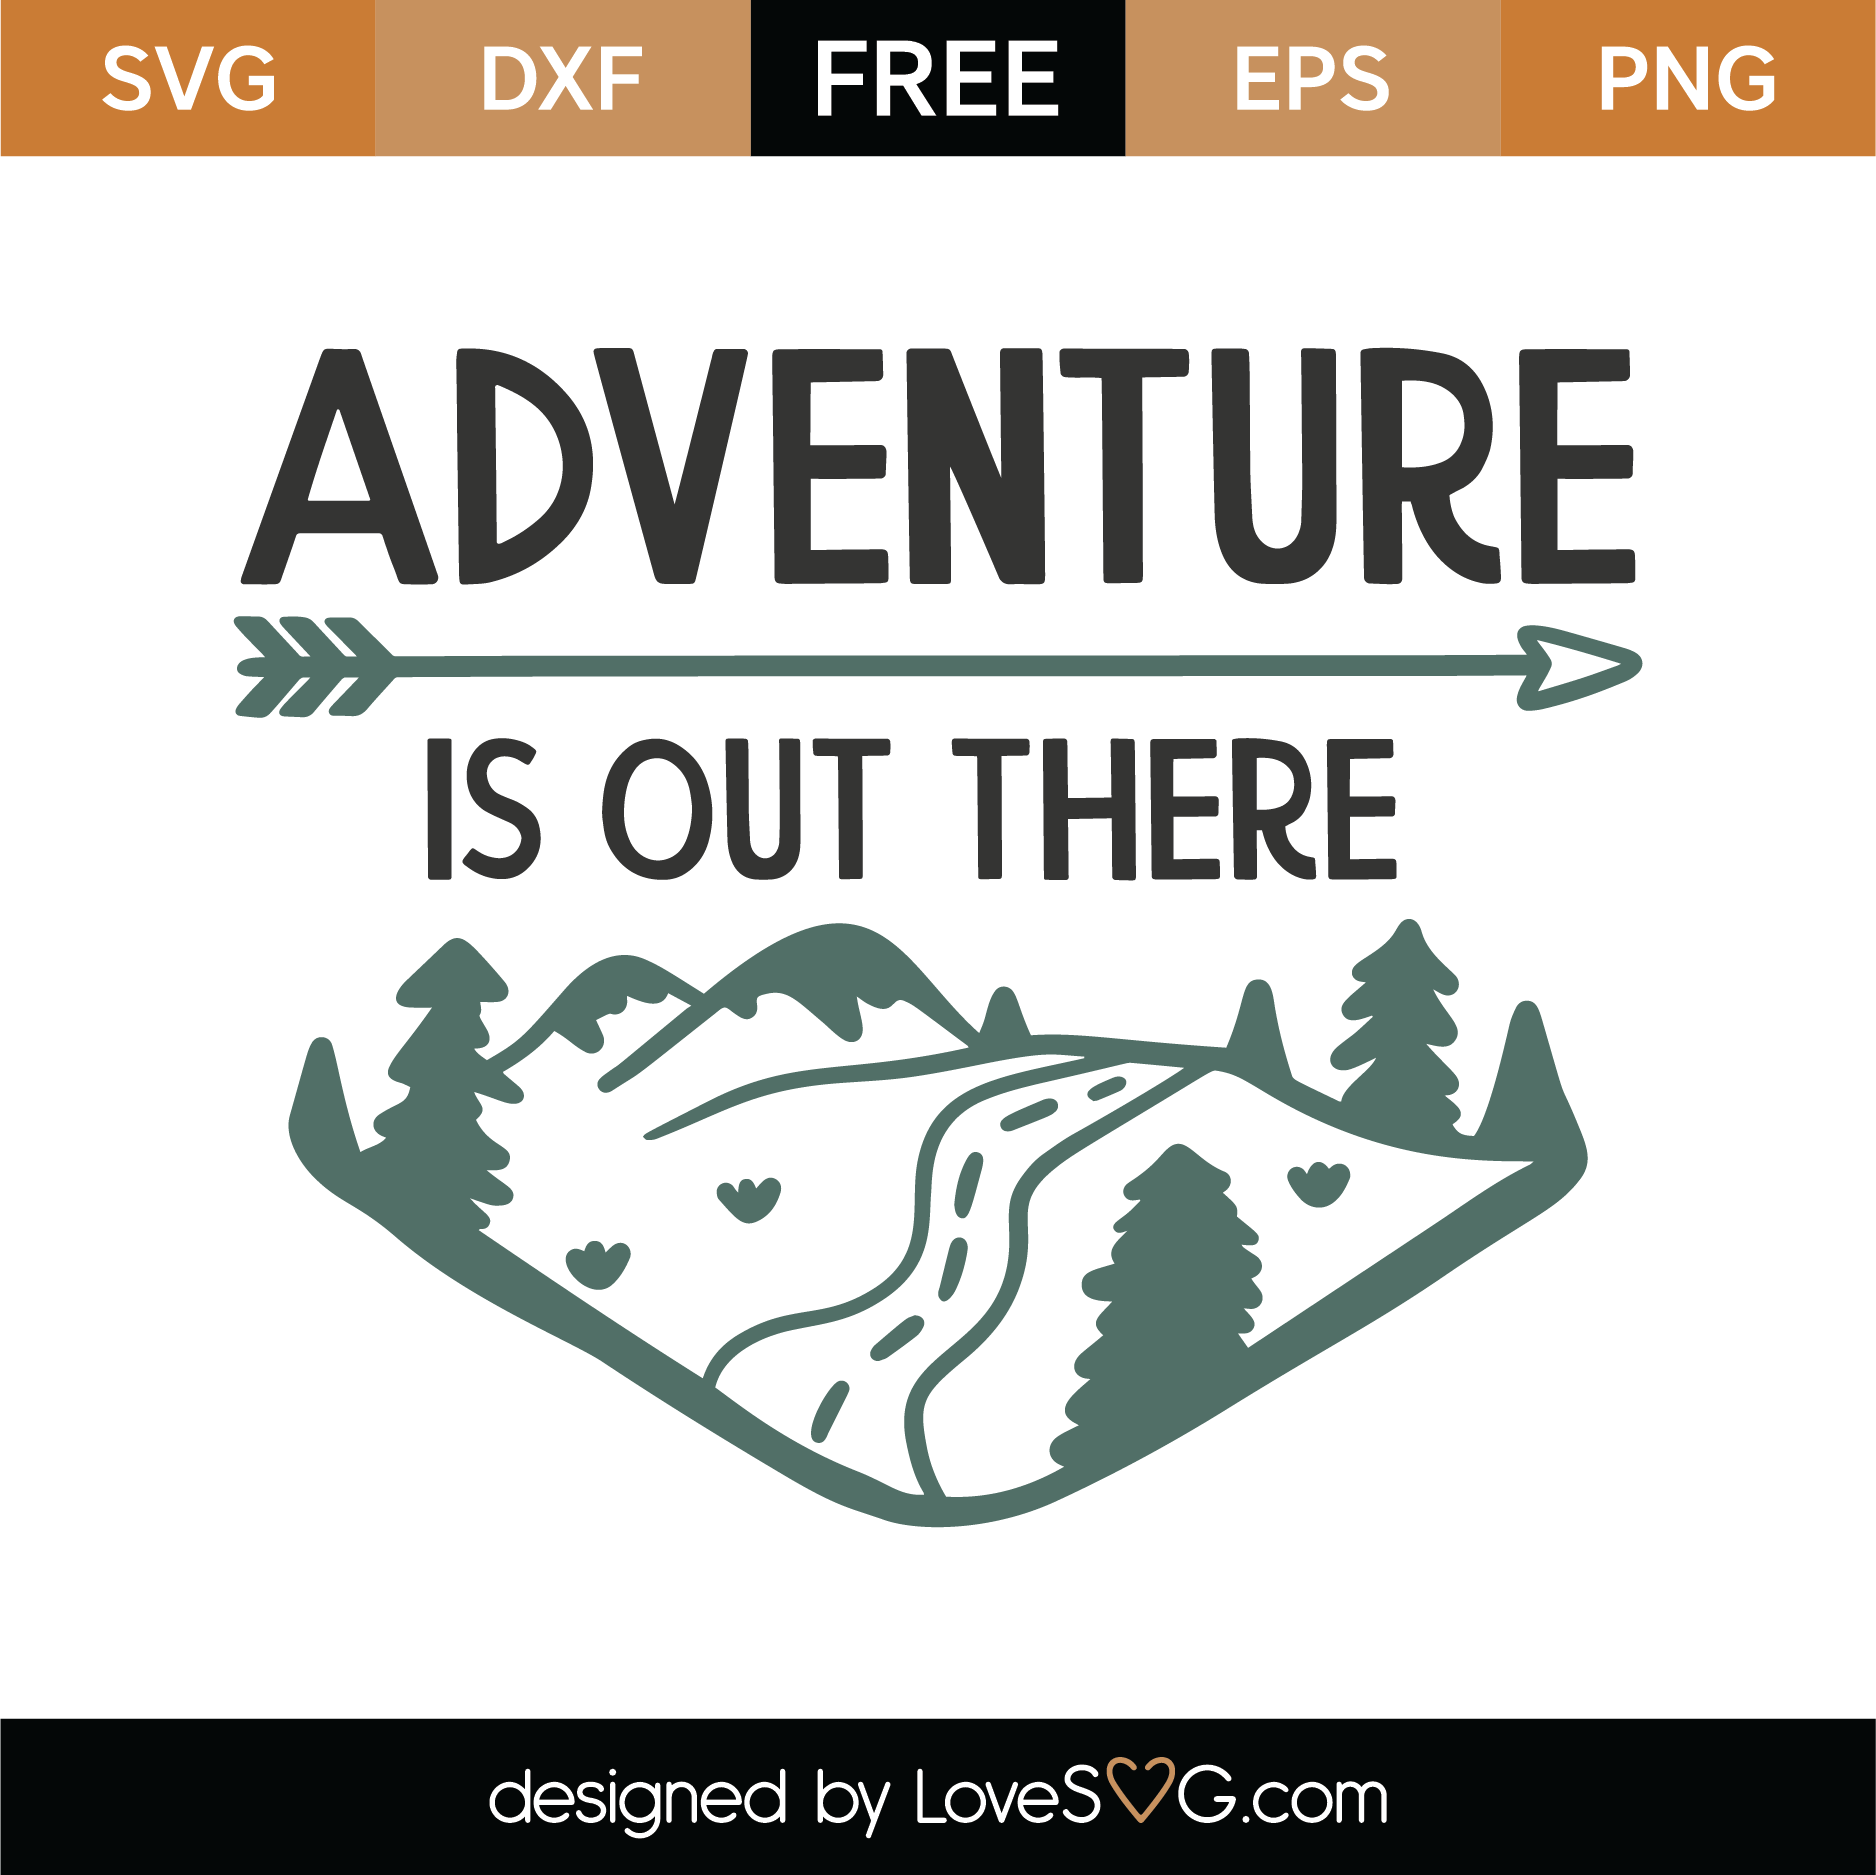 Download Free Adventure Is Out There SVG Cut File | Lovesvg.com